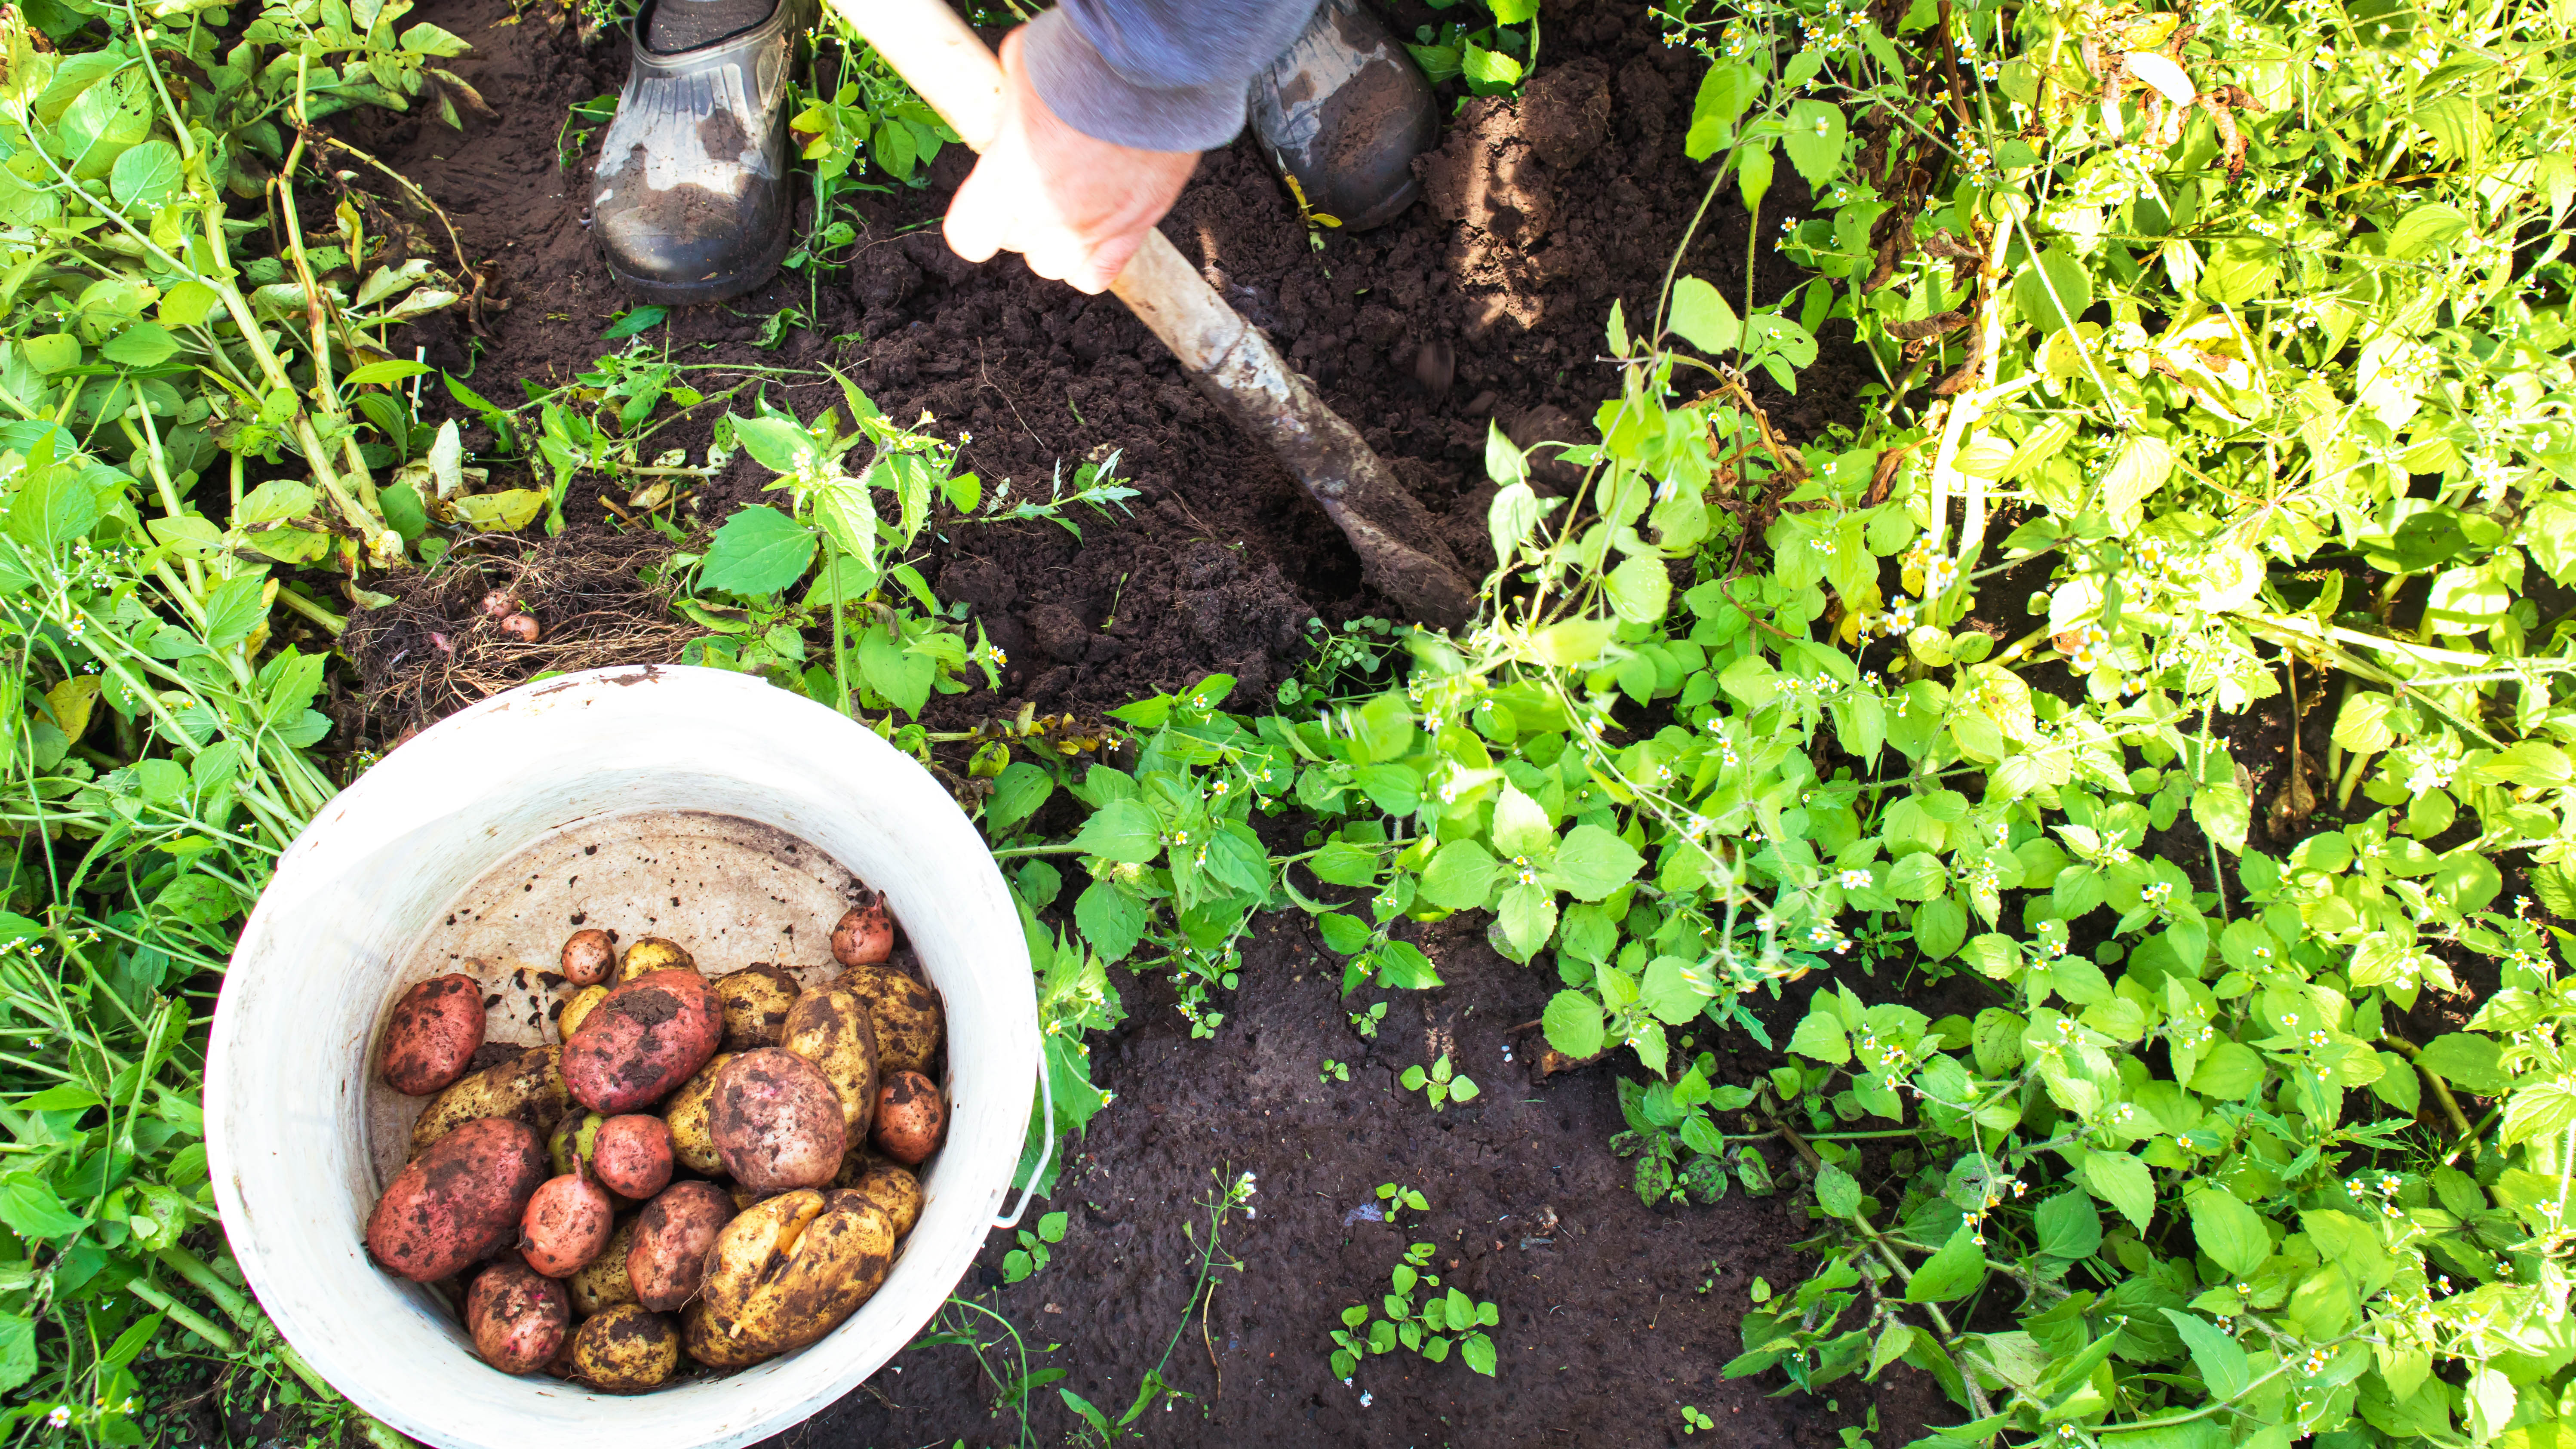 A person harvesting potatoes with a shovel and collecting them in a bucket